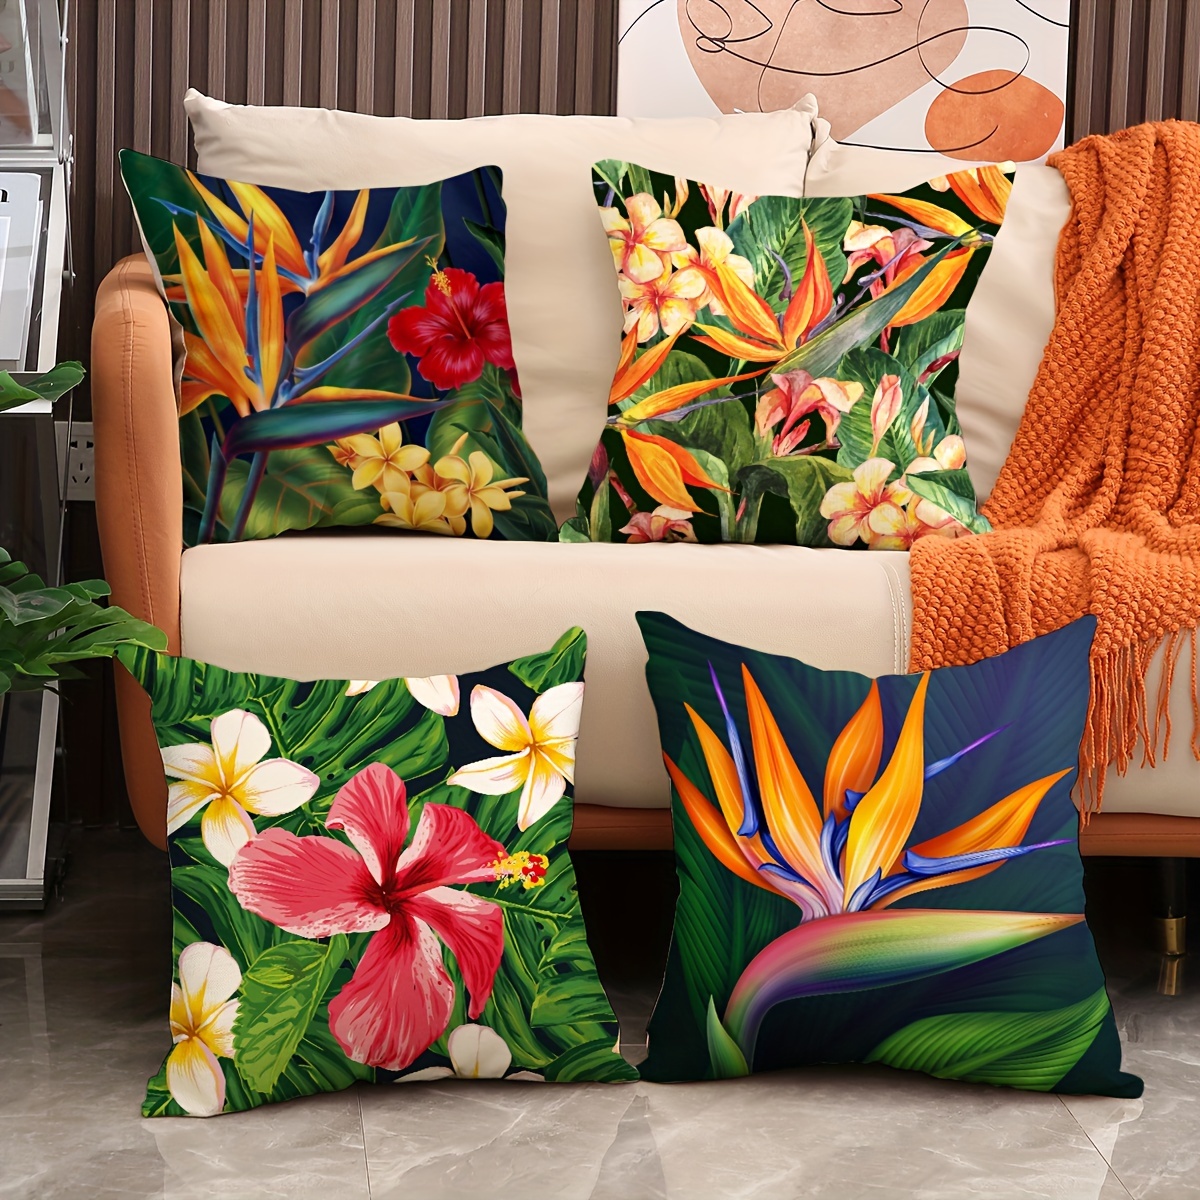 

4pcs, Plant Flower Throw Pillow Cover Home Sofa Cushion Cover Linen Blend Throw Pillow Home 18*18 Inches Pillow Insert Not Included